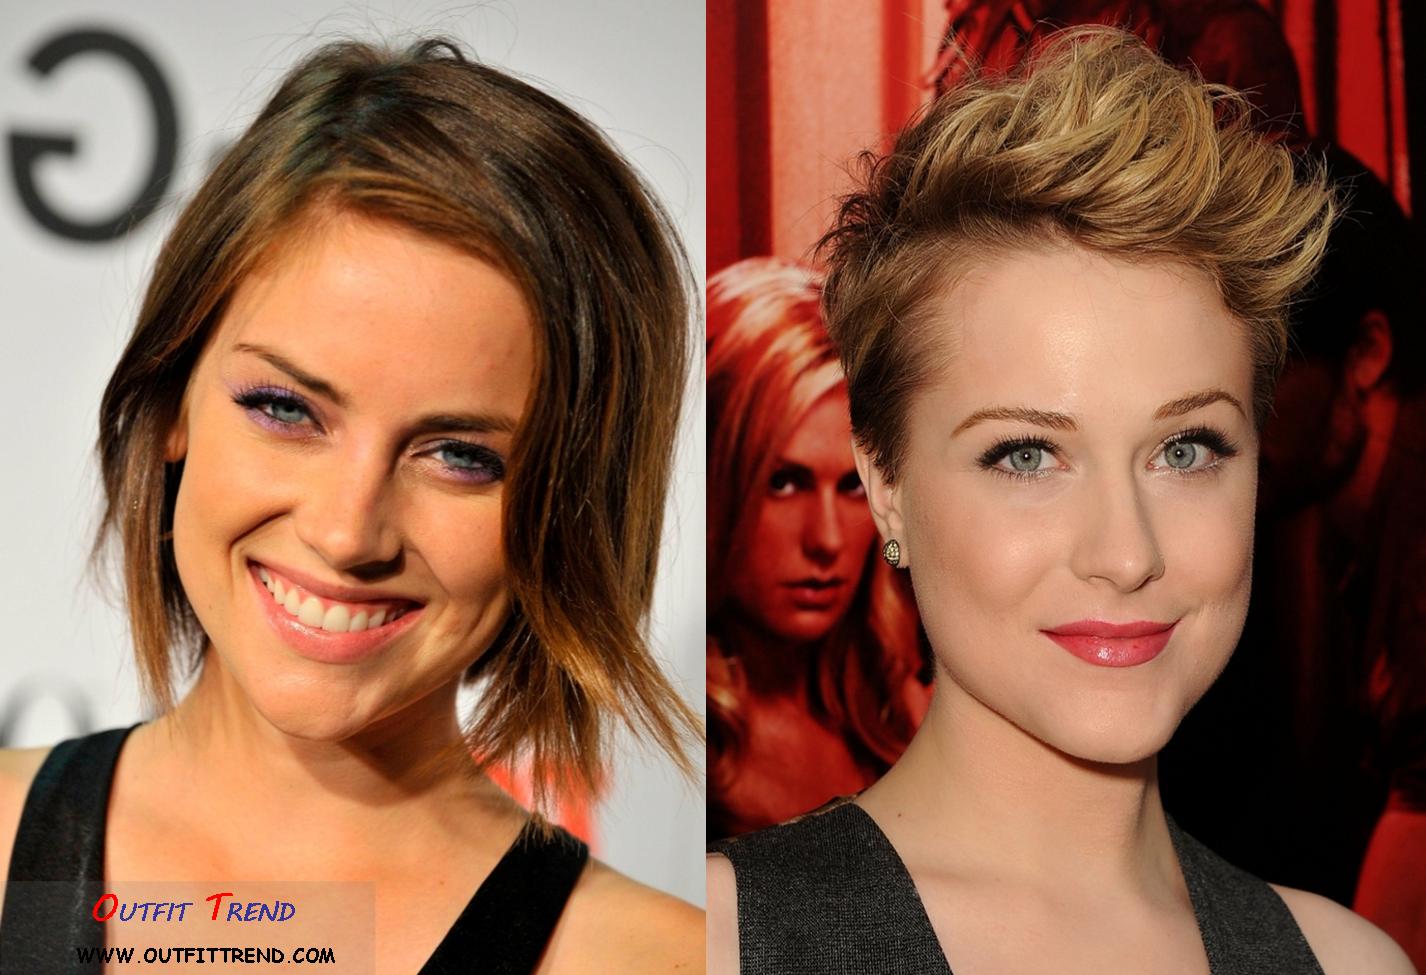 14 Top Celebrities Inspired Short Hairstyles To Follow This Year